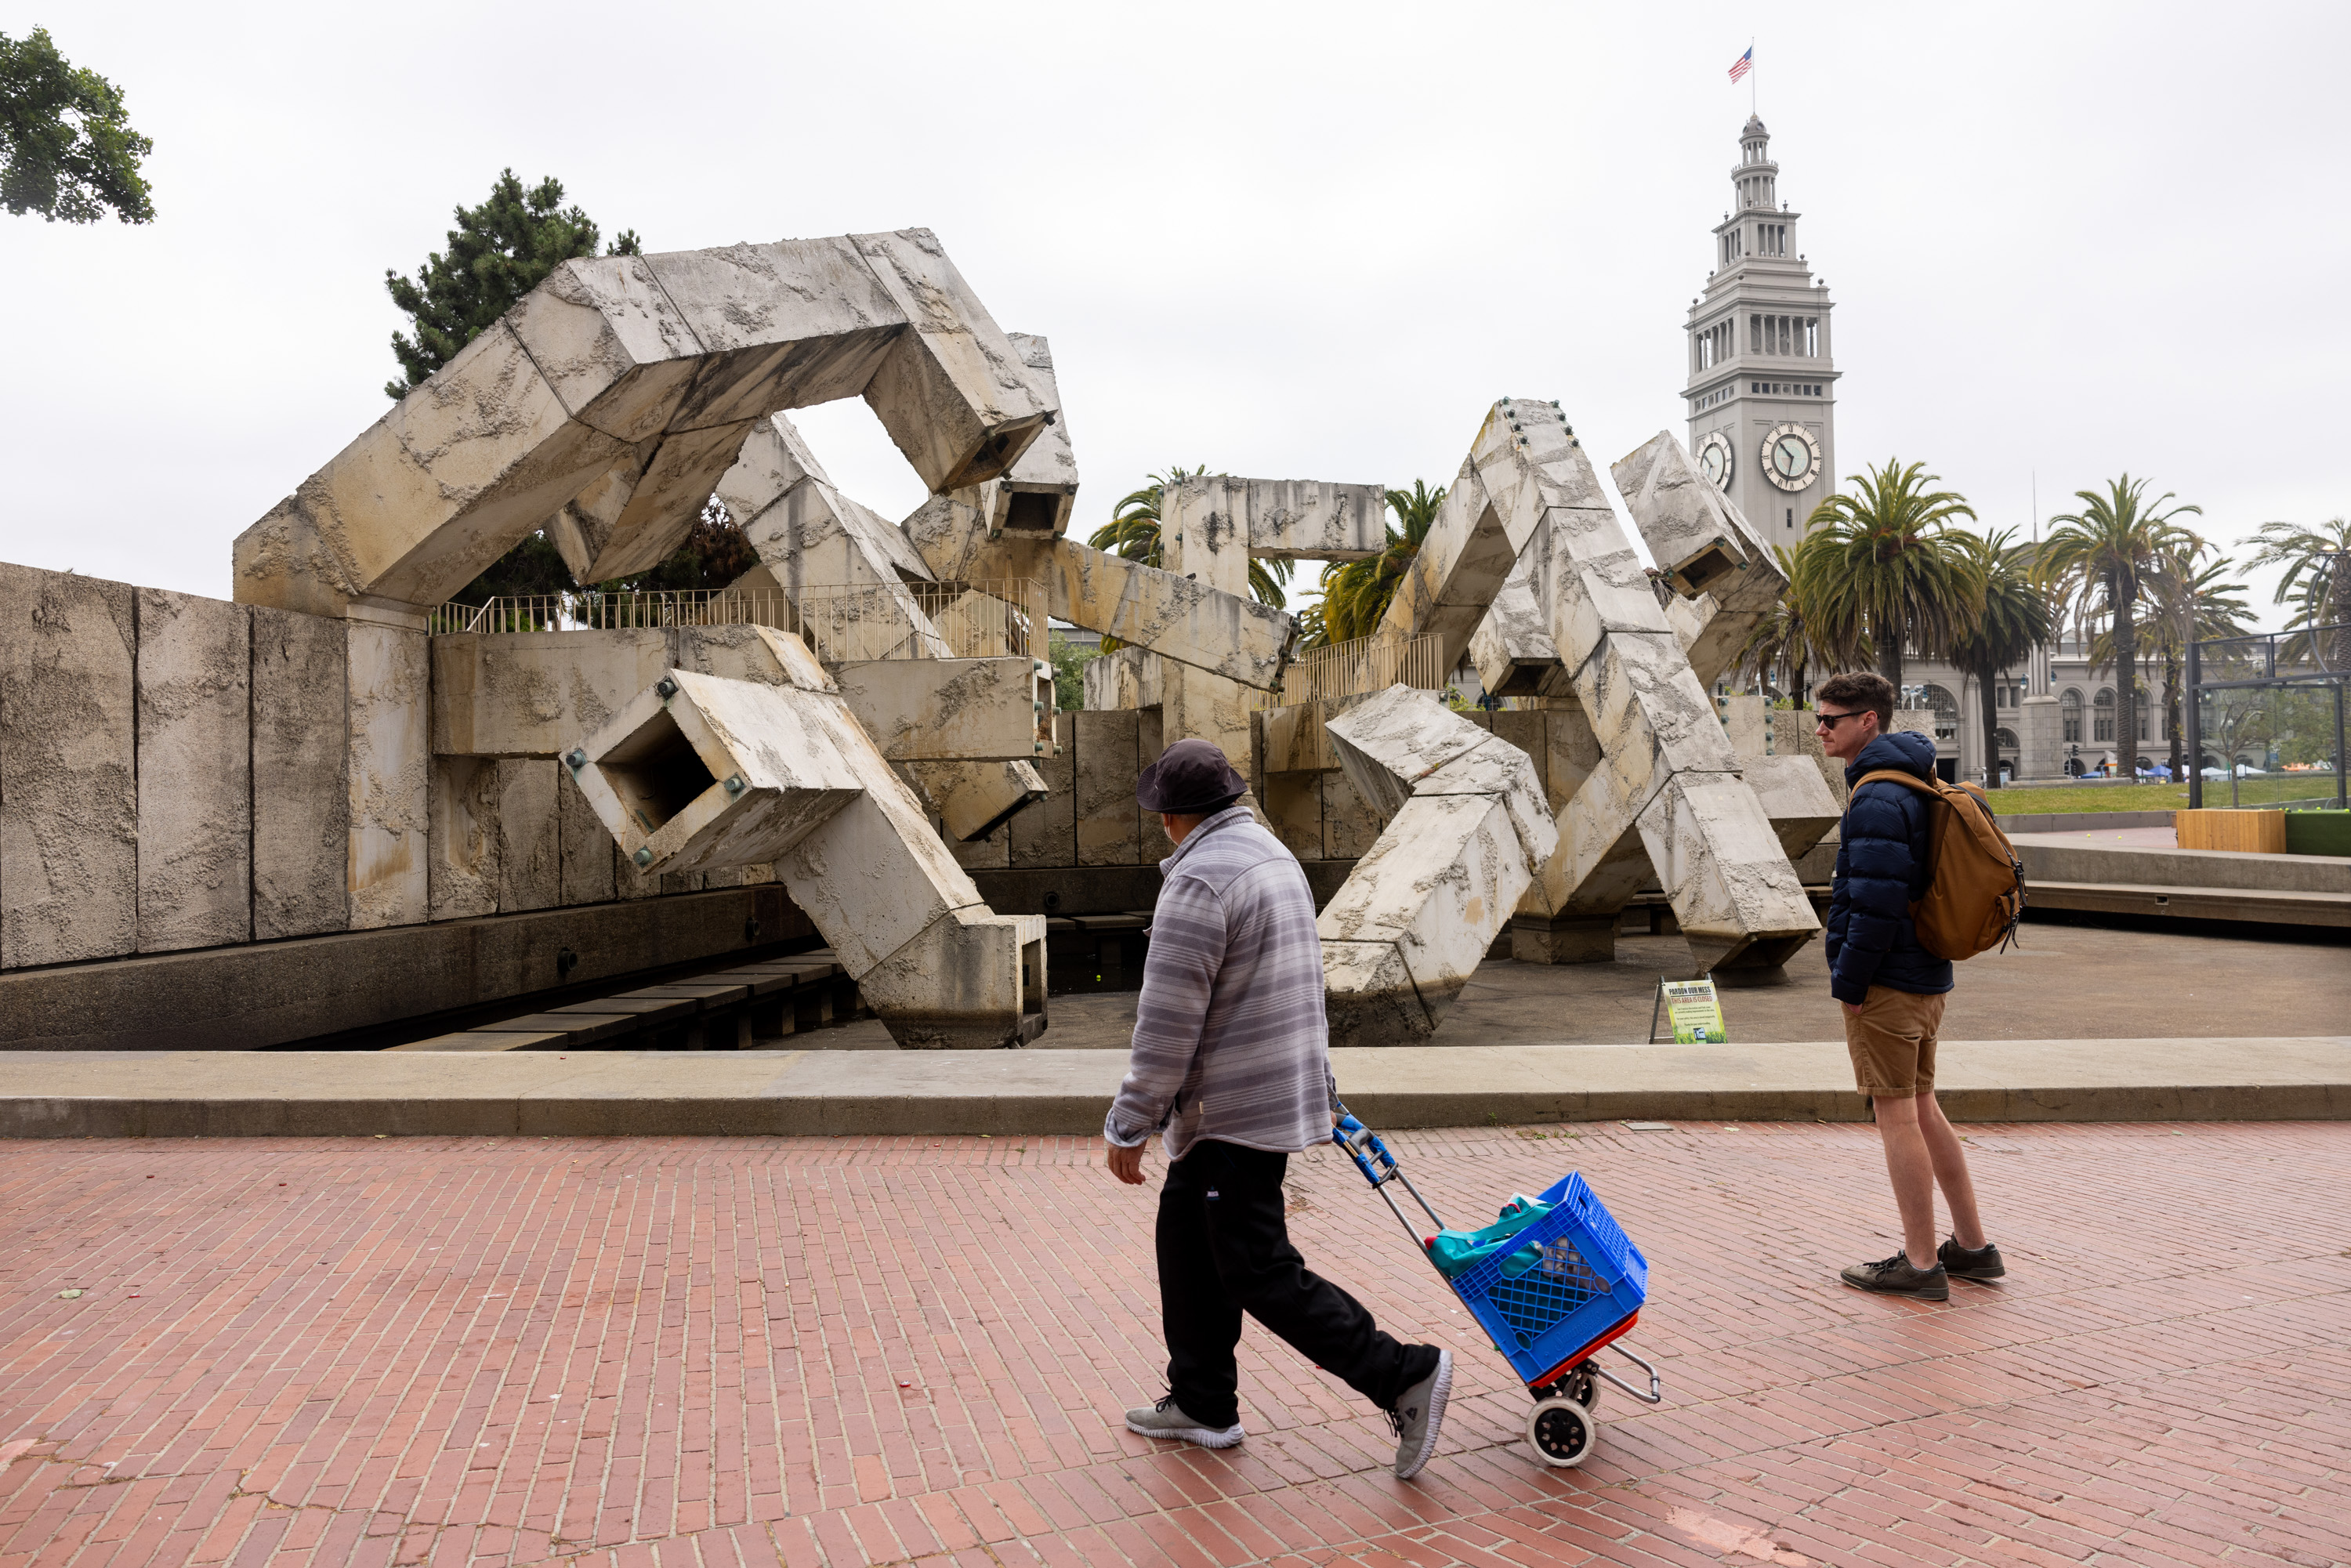 A man with a rolling cart and another person walk by a large, abstract concrete sculpture. In the background, there is a clock tower and palm trees.